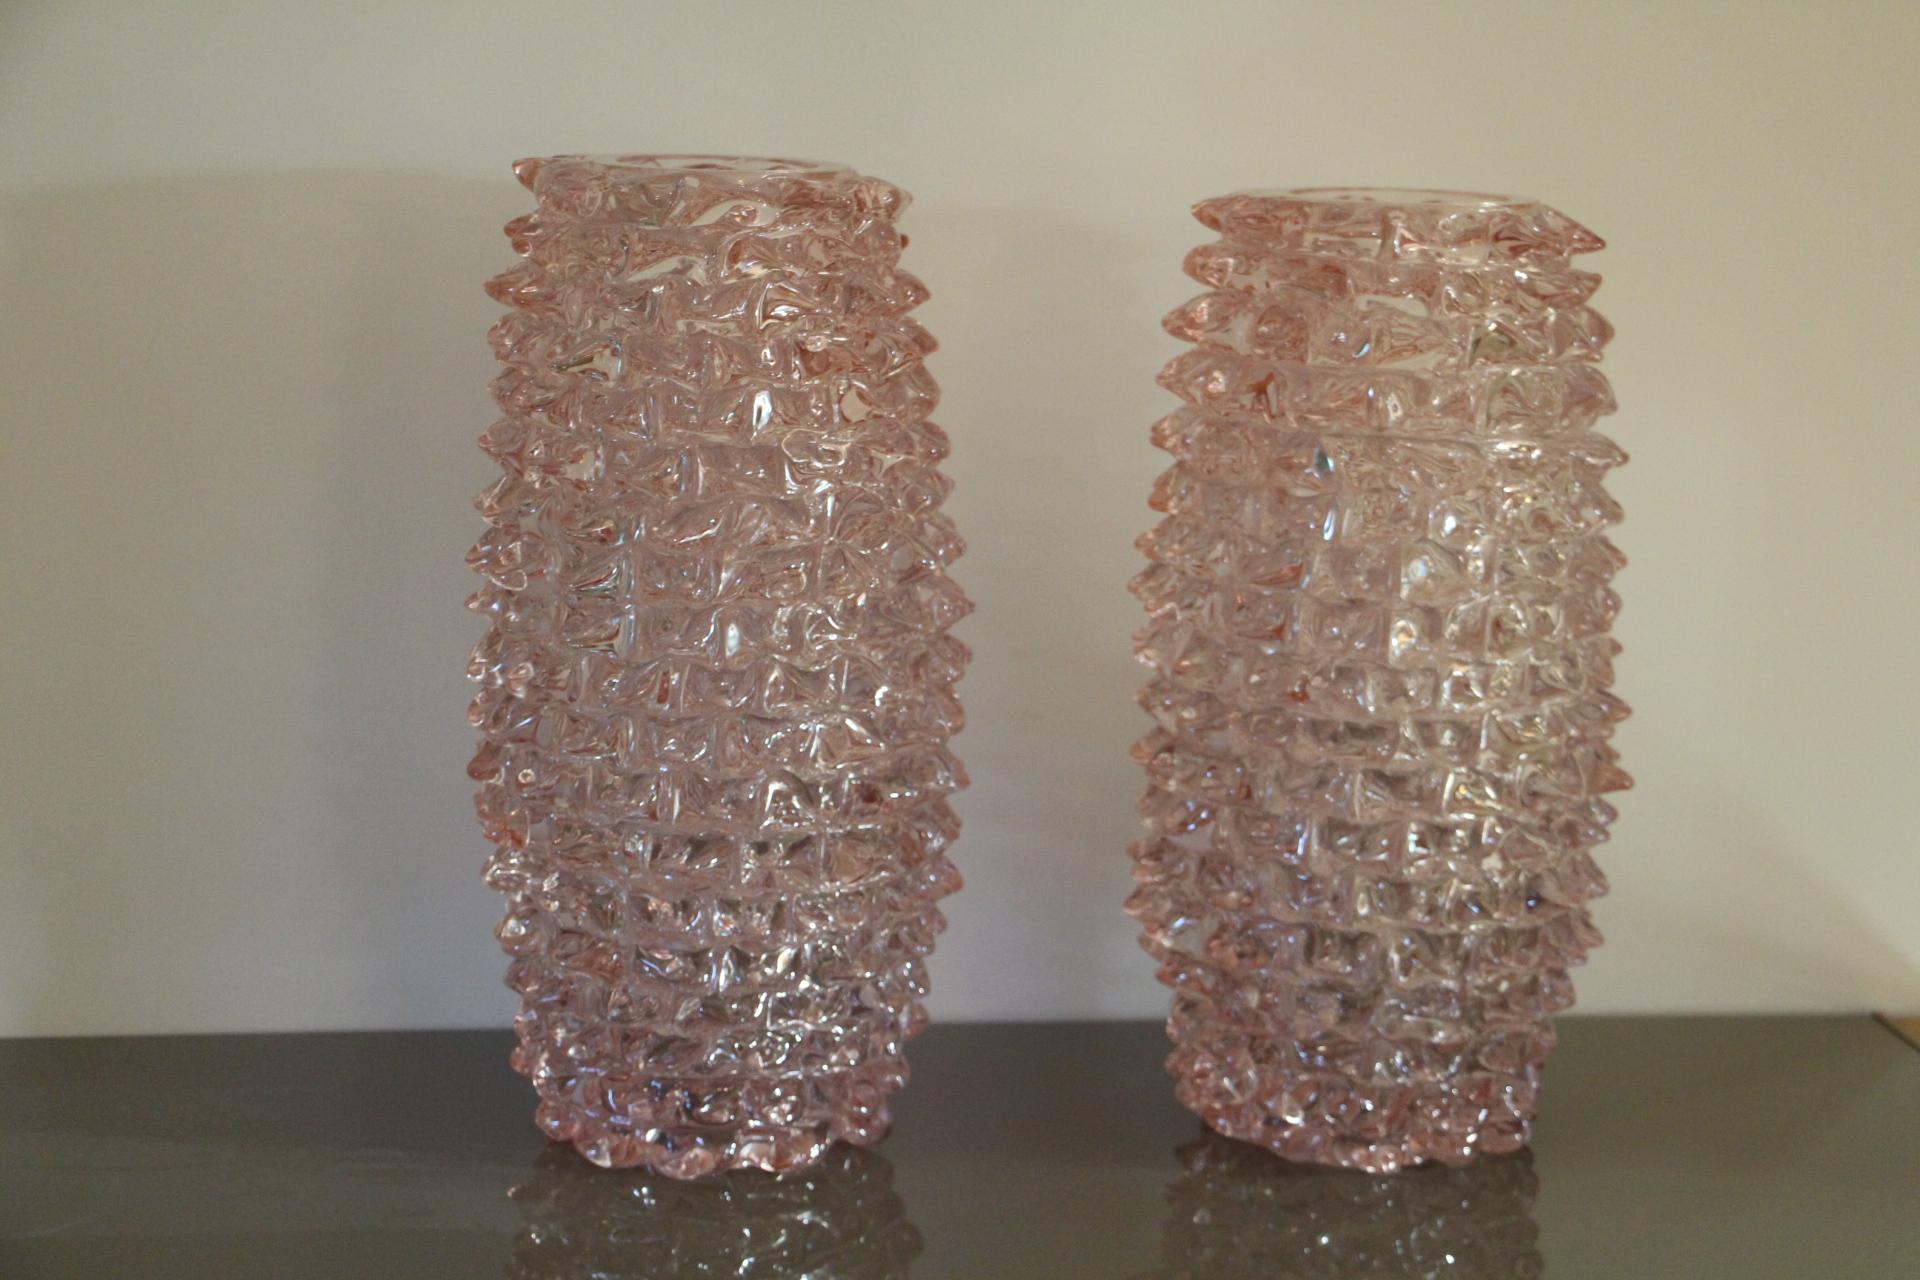 Contemporary Pair of Tall Pink Vases in Murano Glass with Spikes Decor, Barovier Style